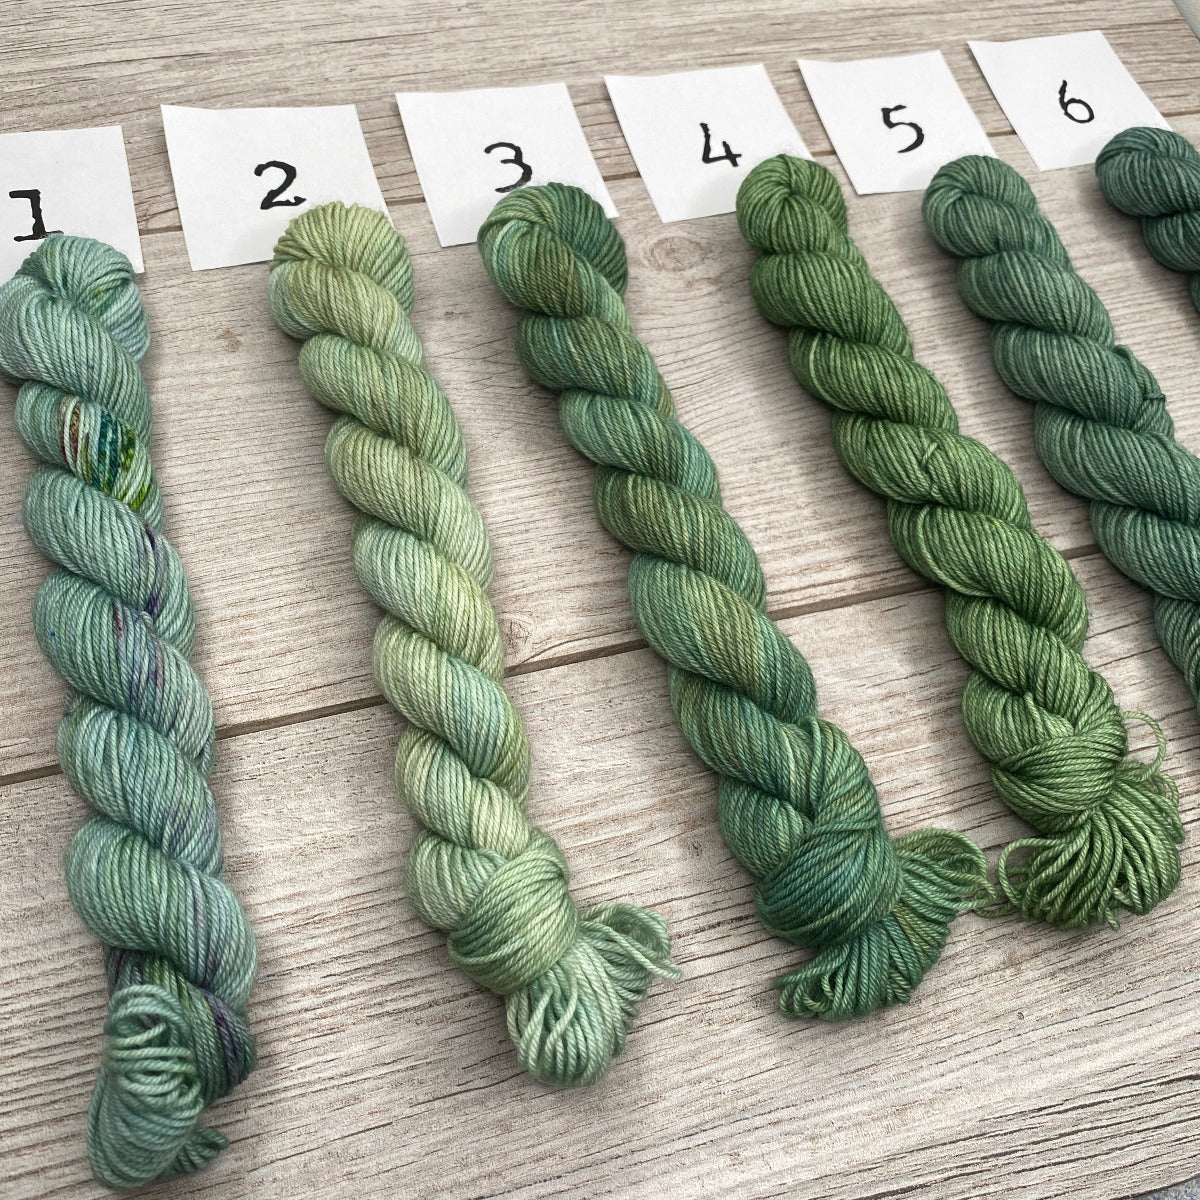 Mini Singles  |  Green and Teal Choices  |  SHEEPISHsock  |  fingering weight